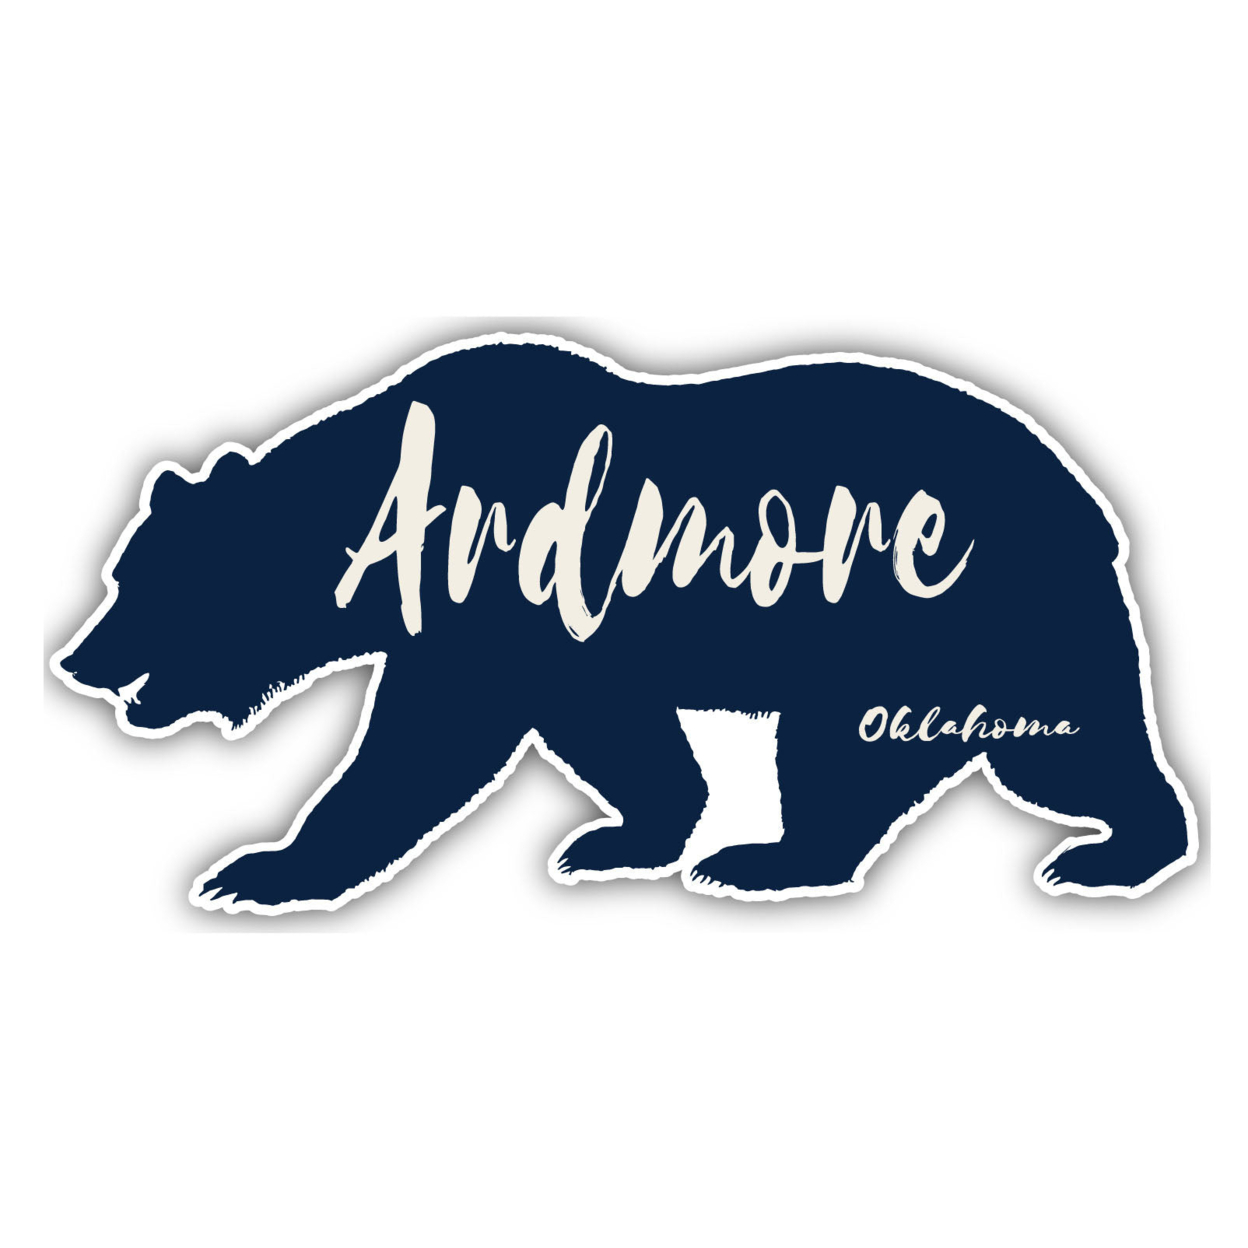 Ardmore Oklahoma Souvenir Decorative Stickers (Choose Theme And Size) - 4-Pack, 8-Inch, Adventures Awaits